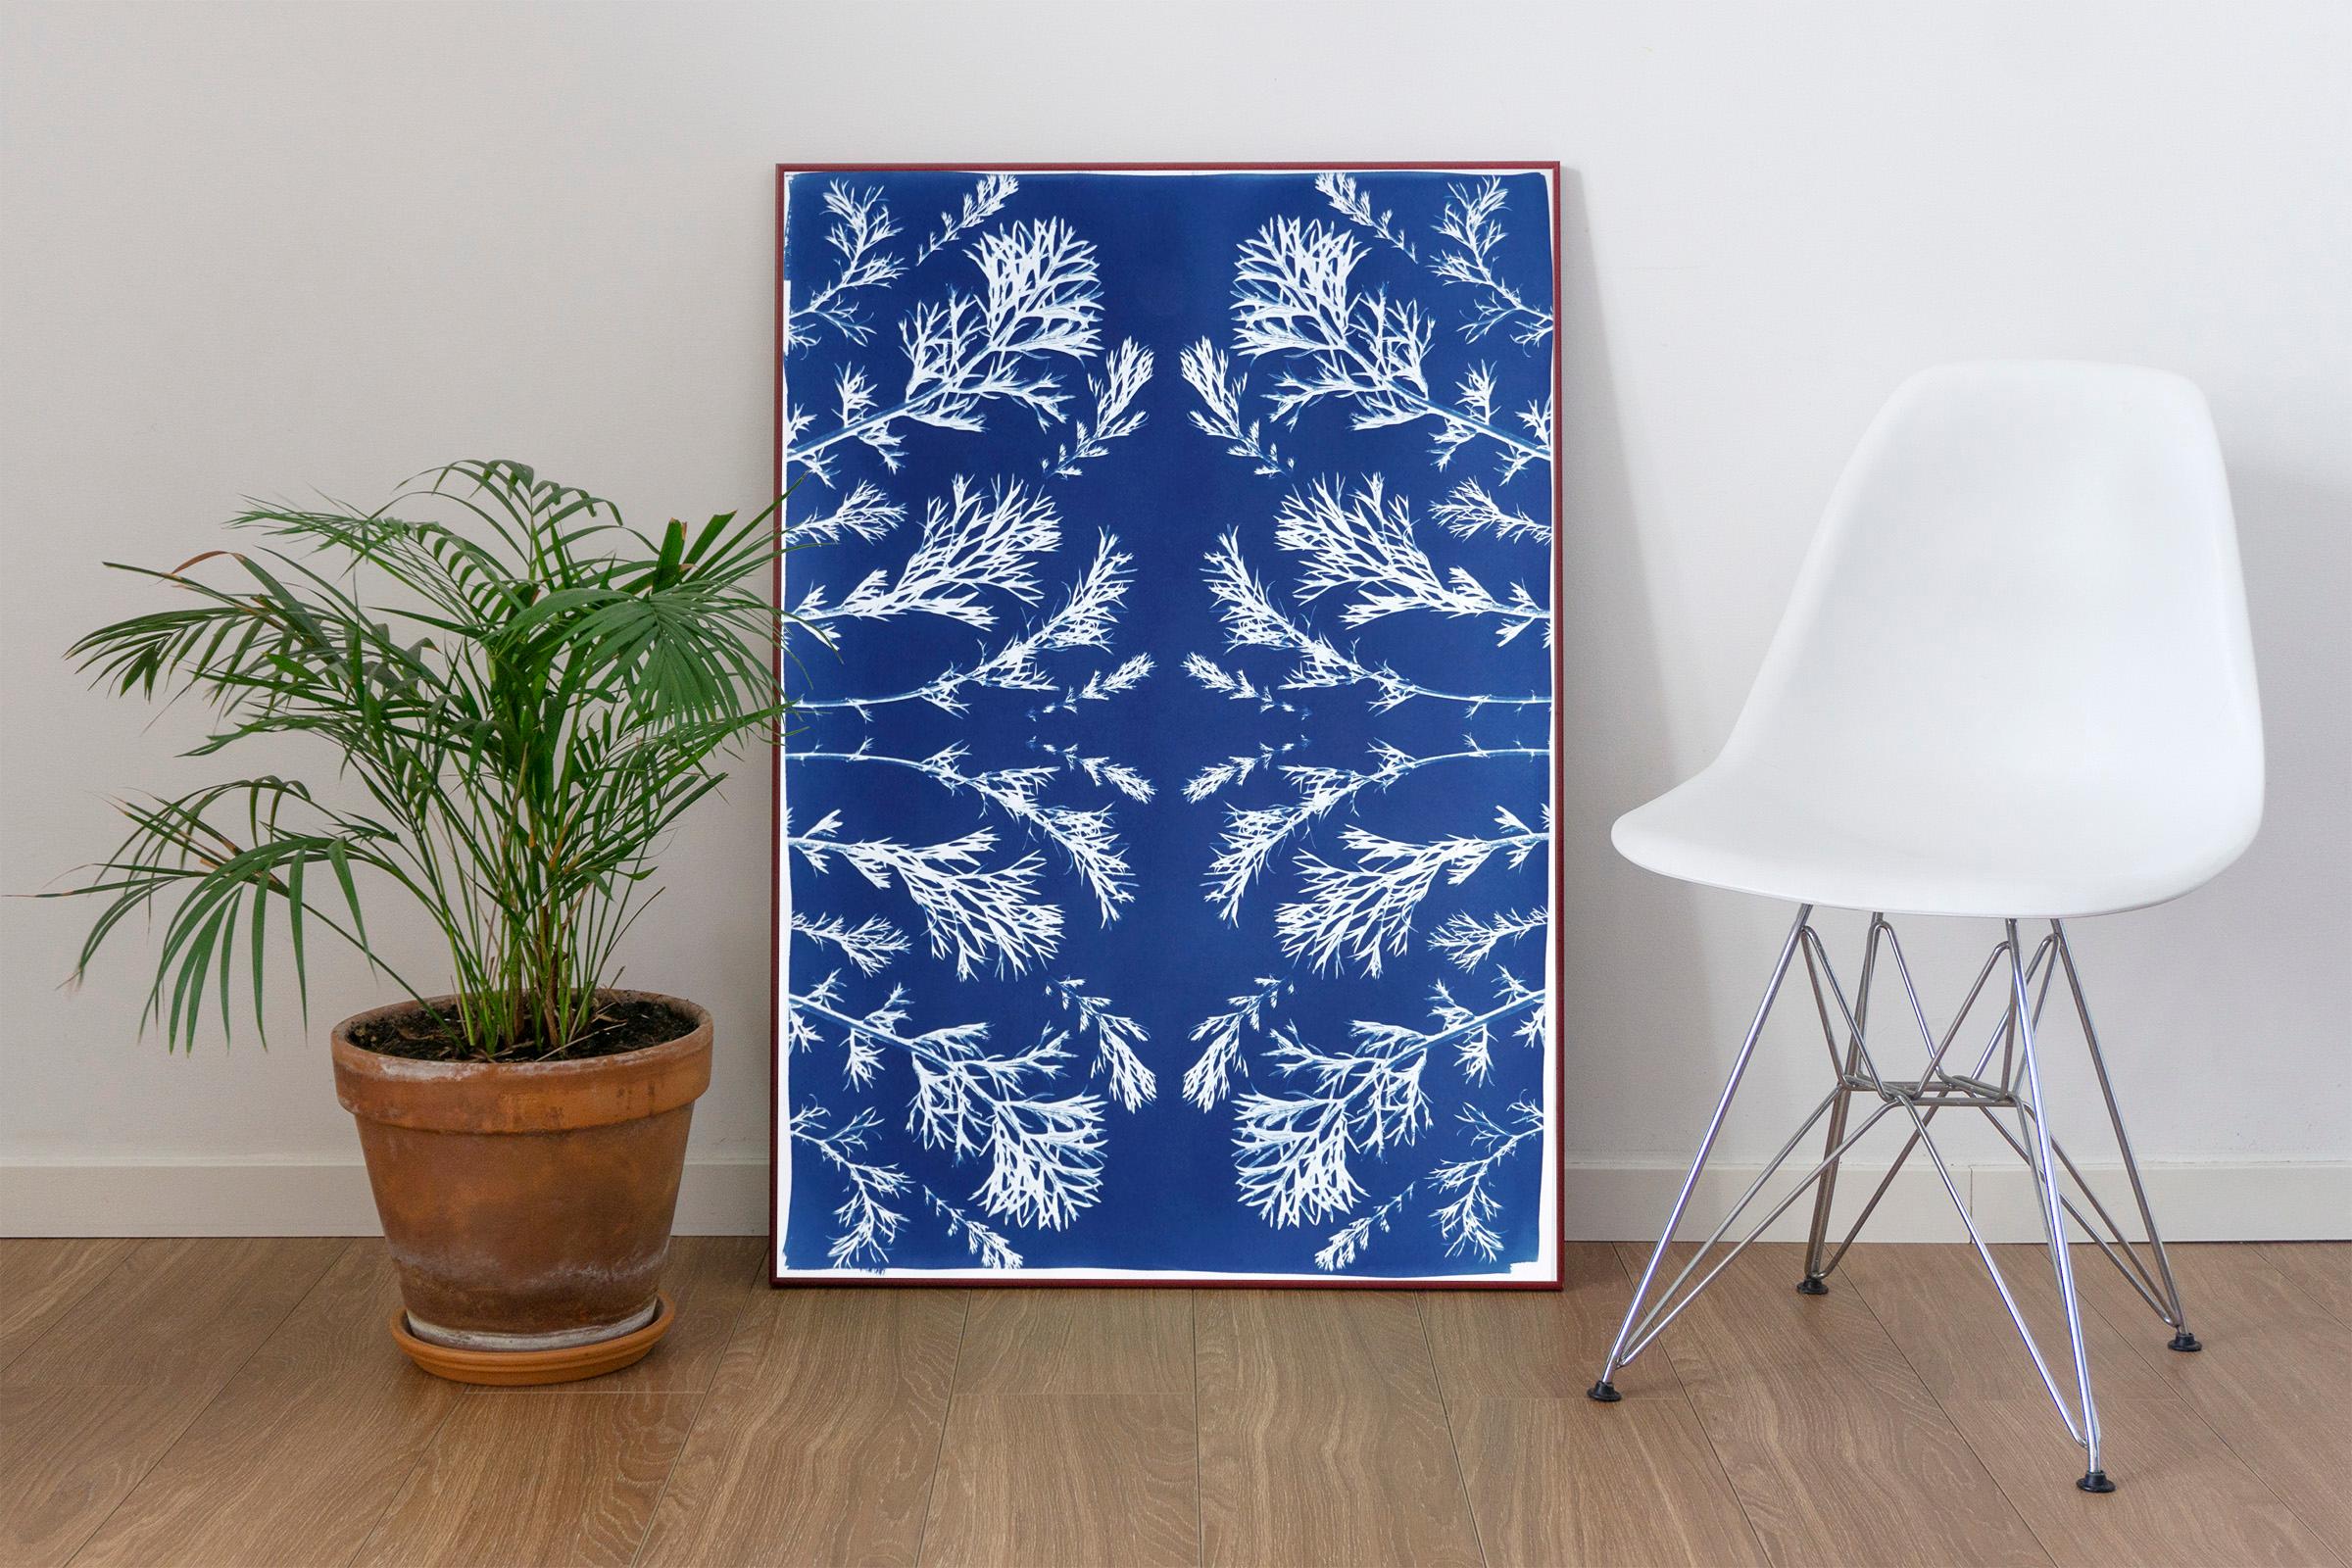 Classic Botanical Cyanotype, Handmade Using Natural Sunlight, Limited Edition  - Print by Kind of Cyan